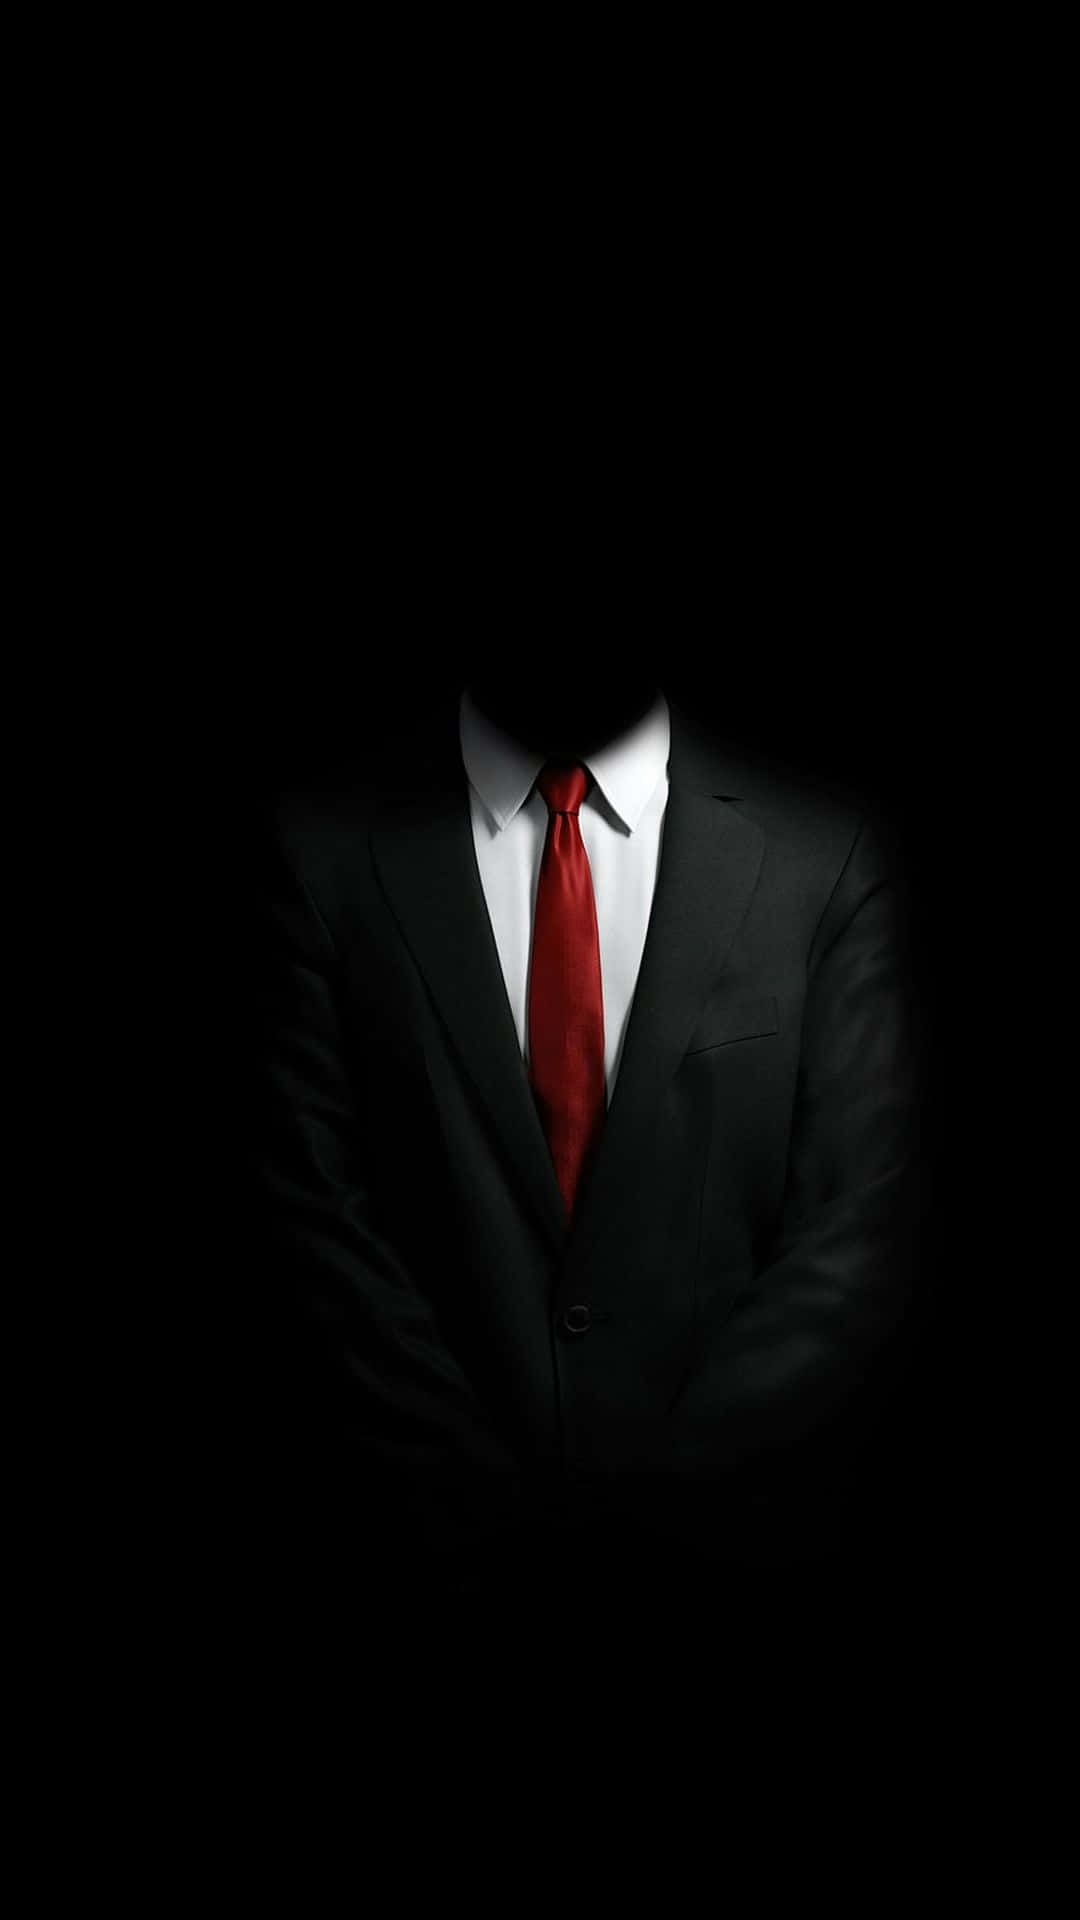 Faceless Man In Suit With Red Necktie Wallpaper